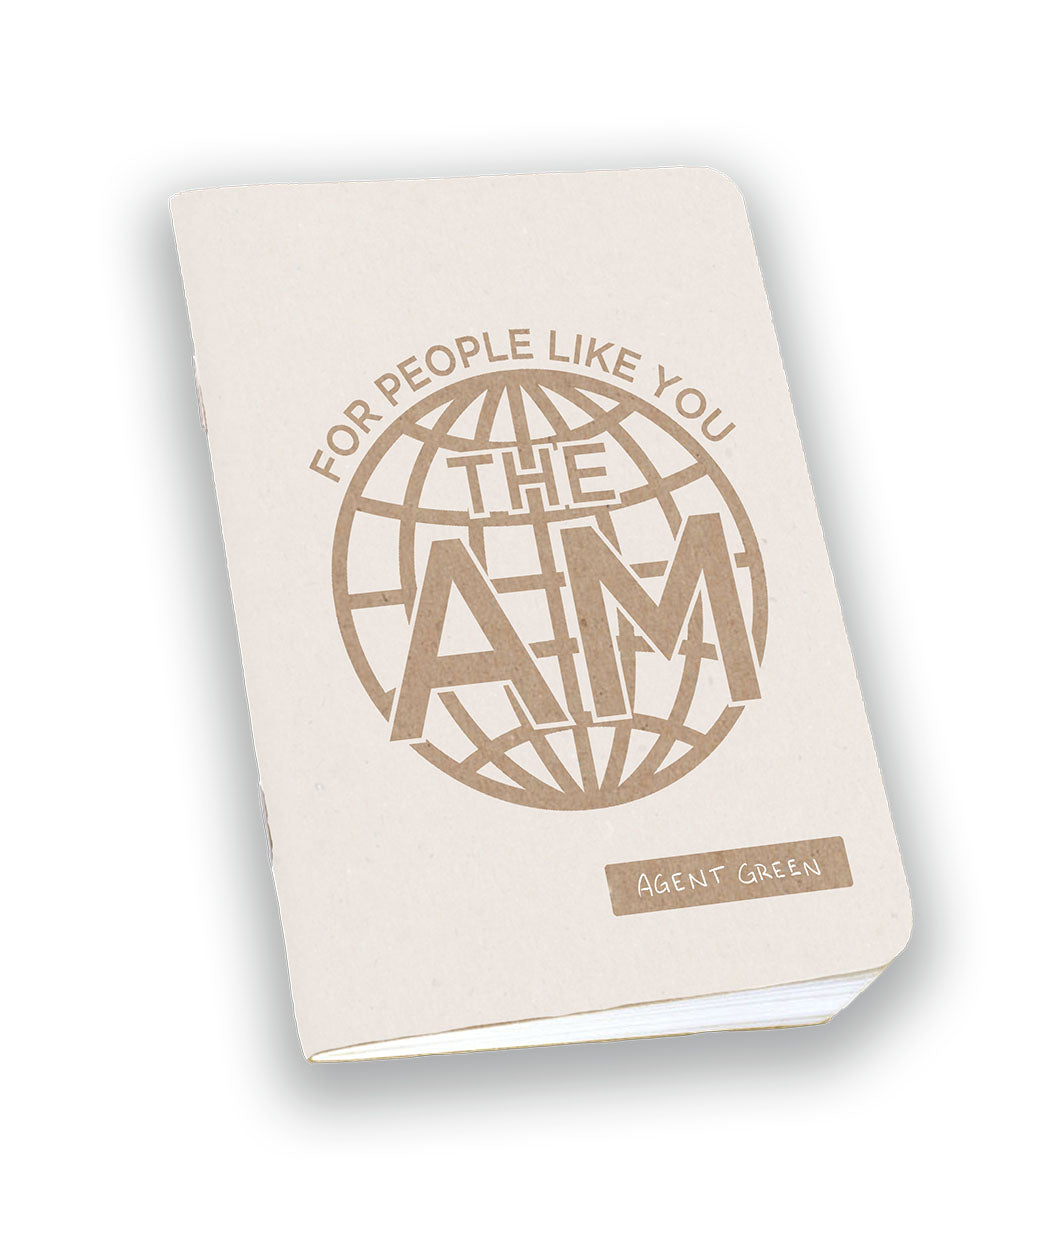 A beige field notebook with a circle in the middle and the text 